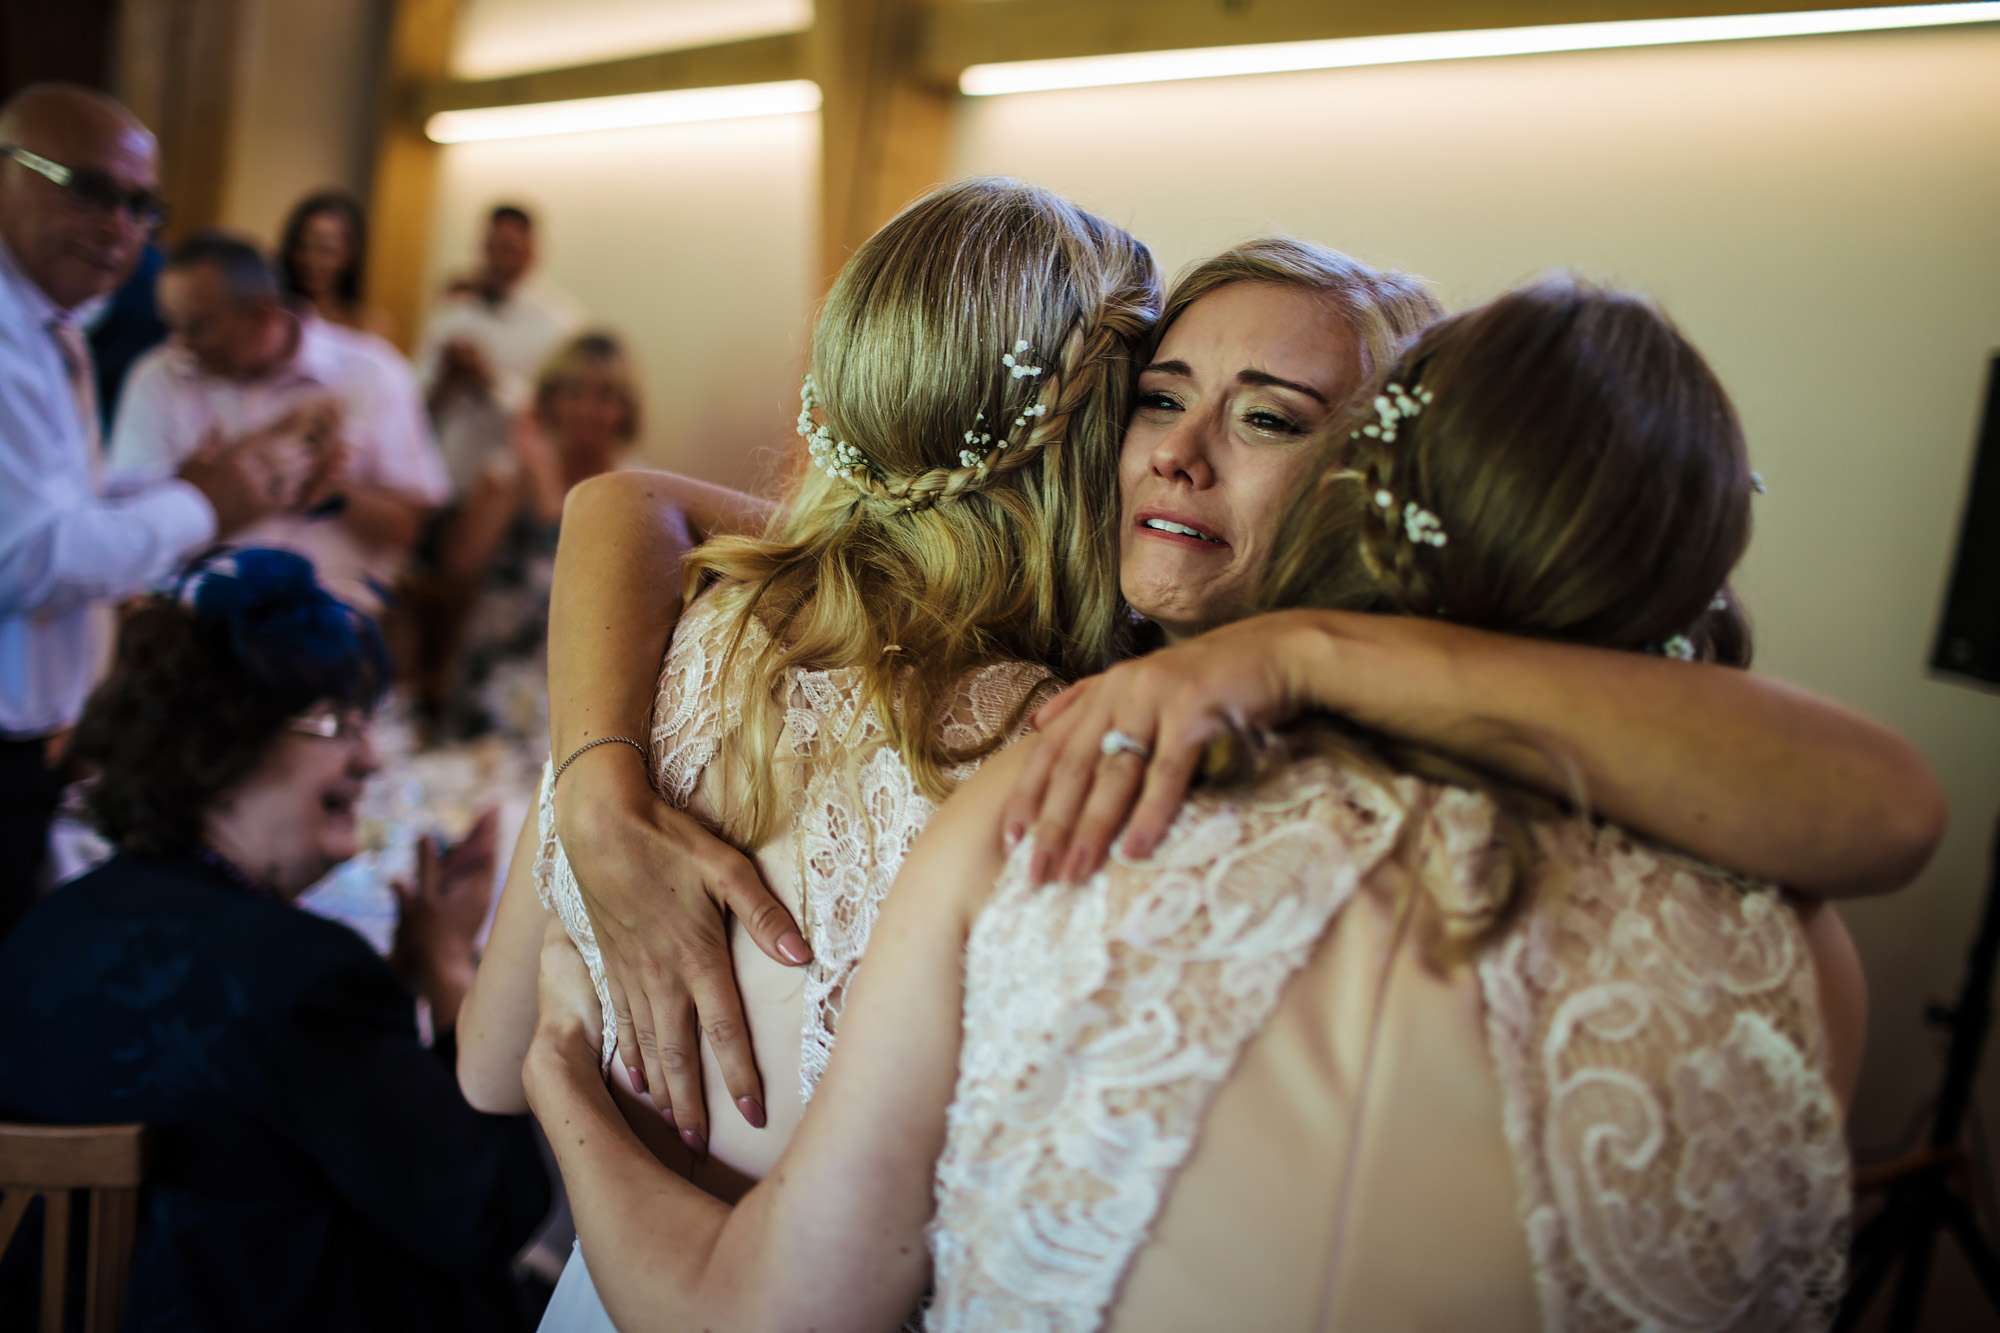 Bride in tears at her wedding with bridesmaids